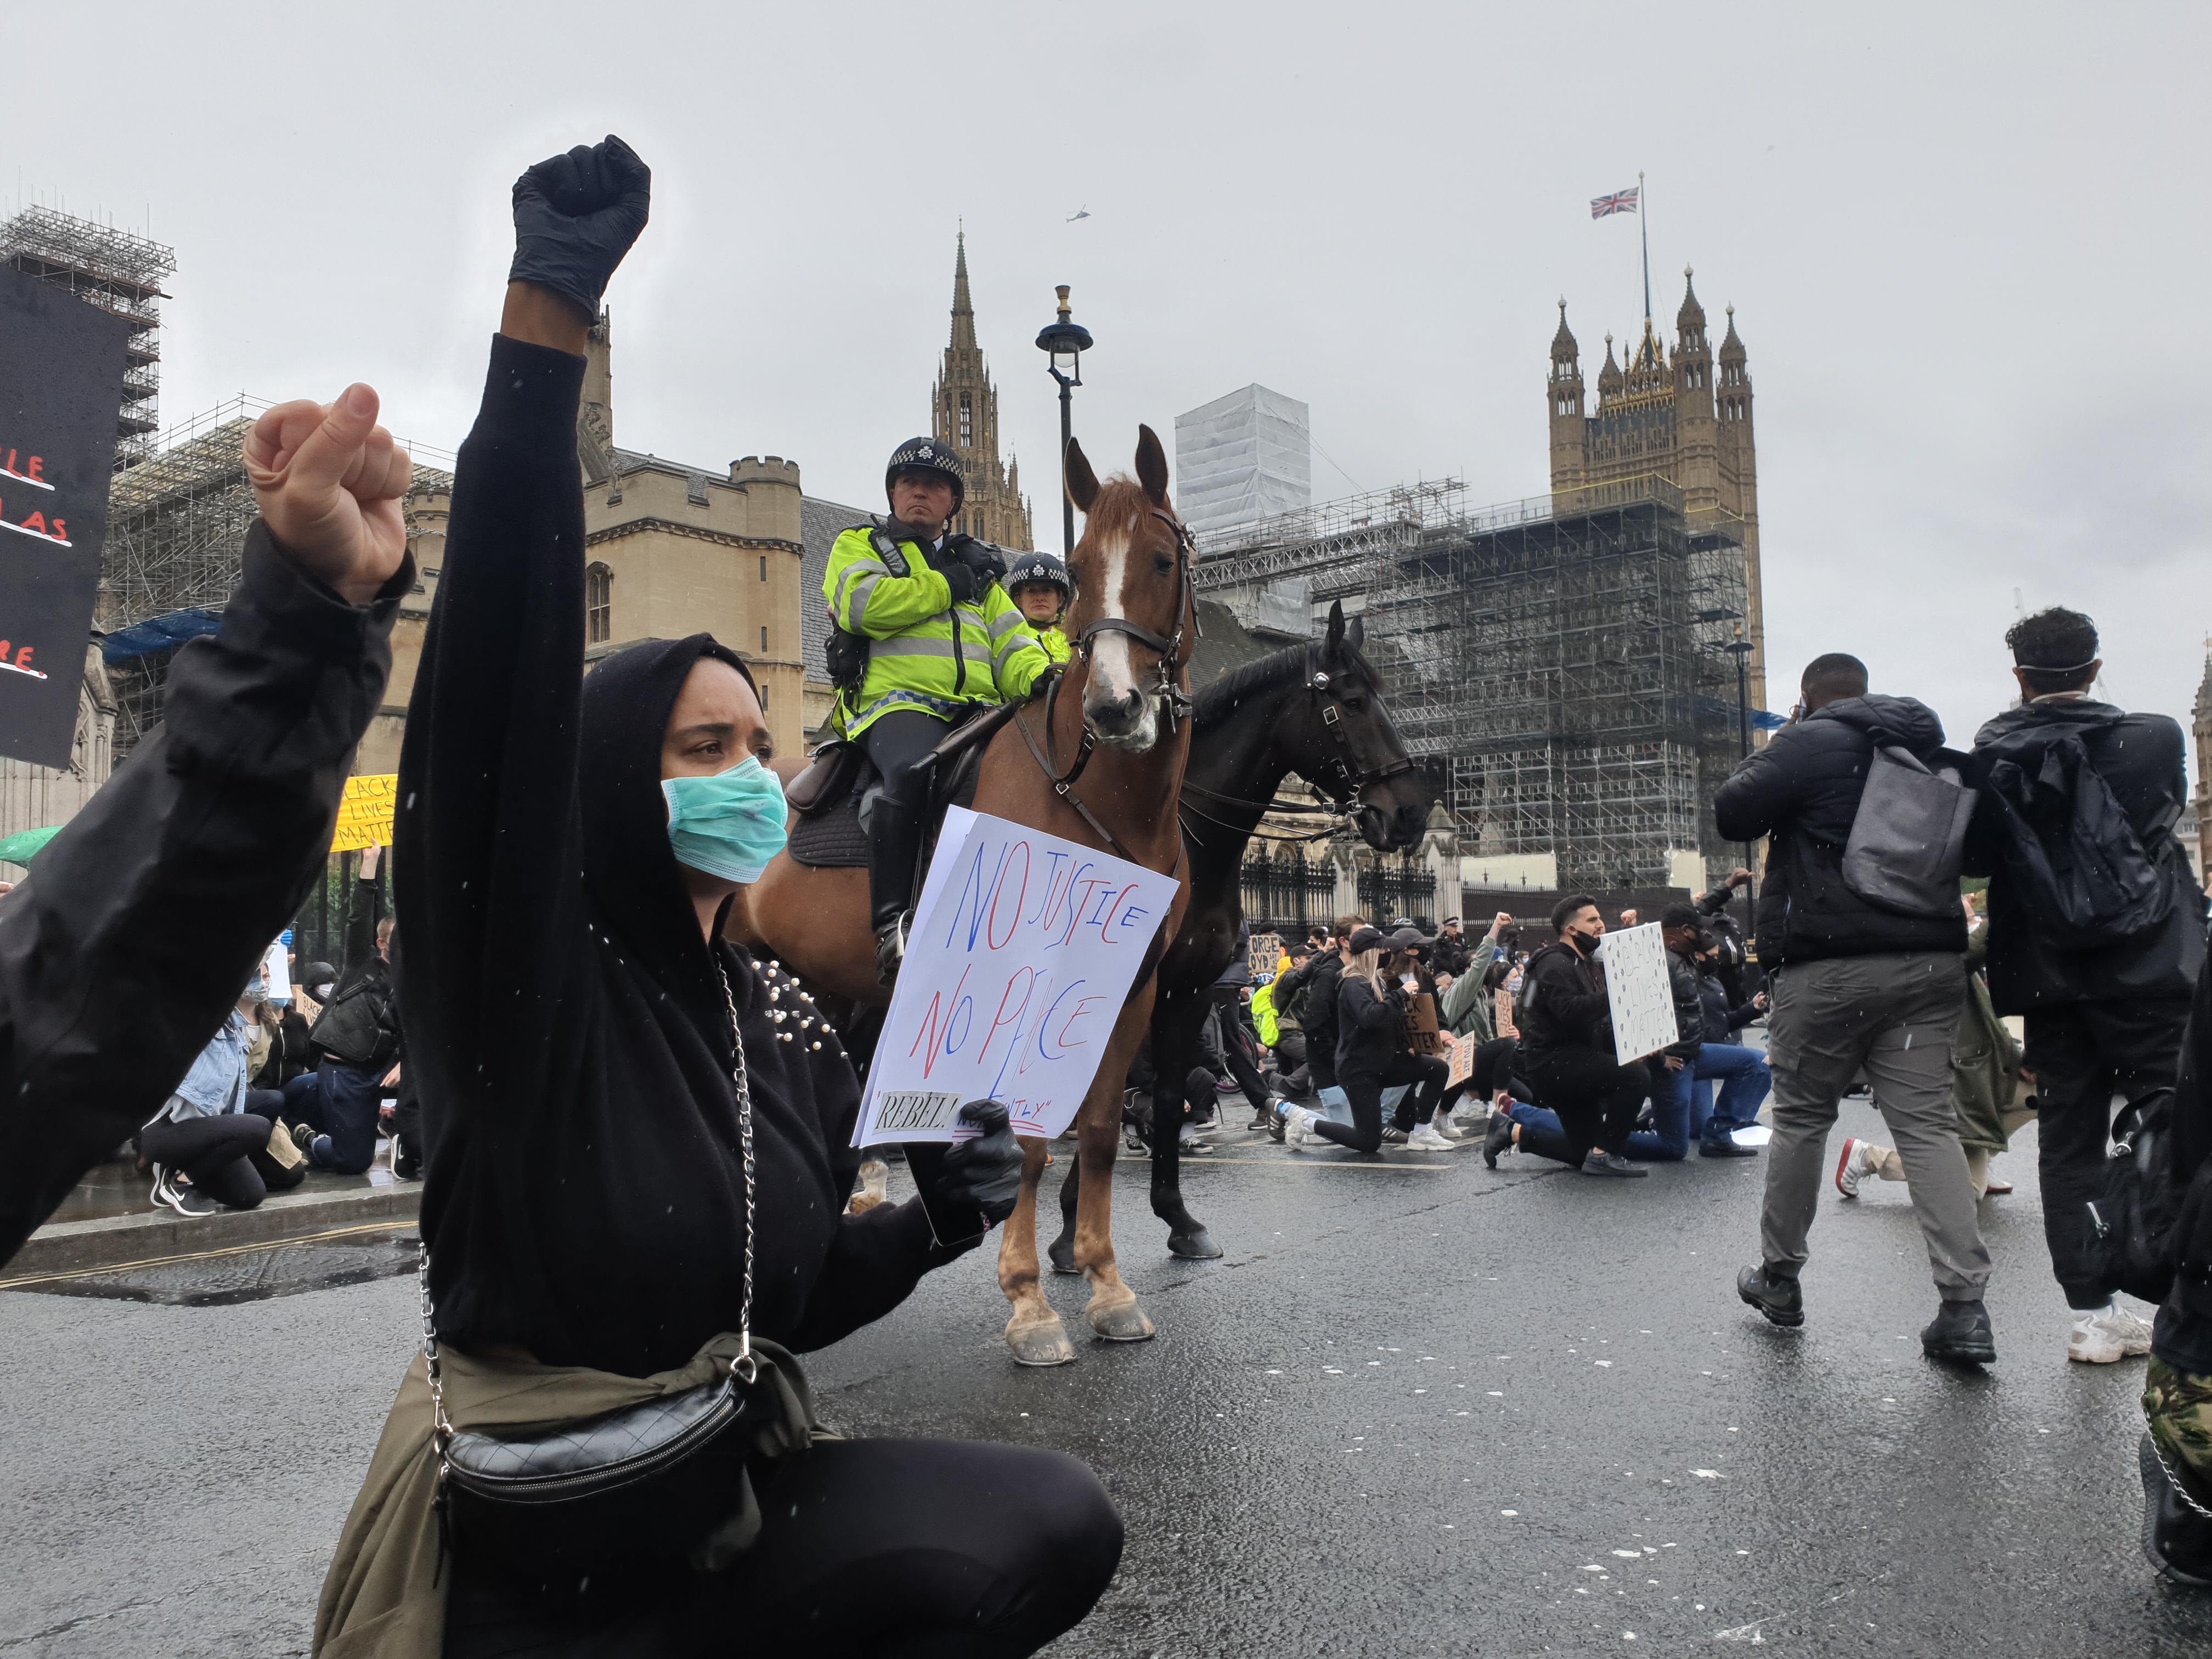 Woman at anti police brutality protest in Parliament Square takes a knee in front of Police on horseback